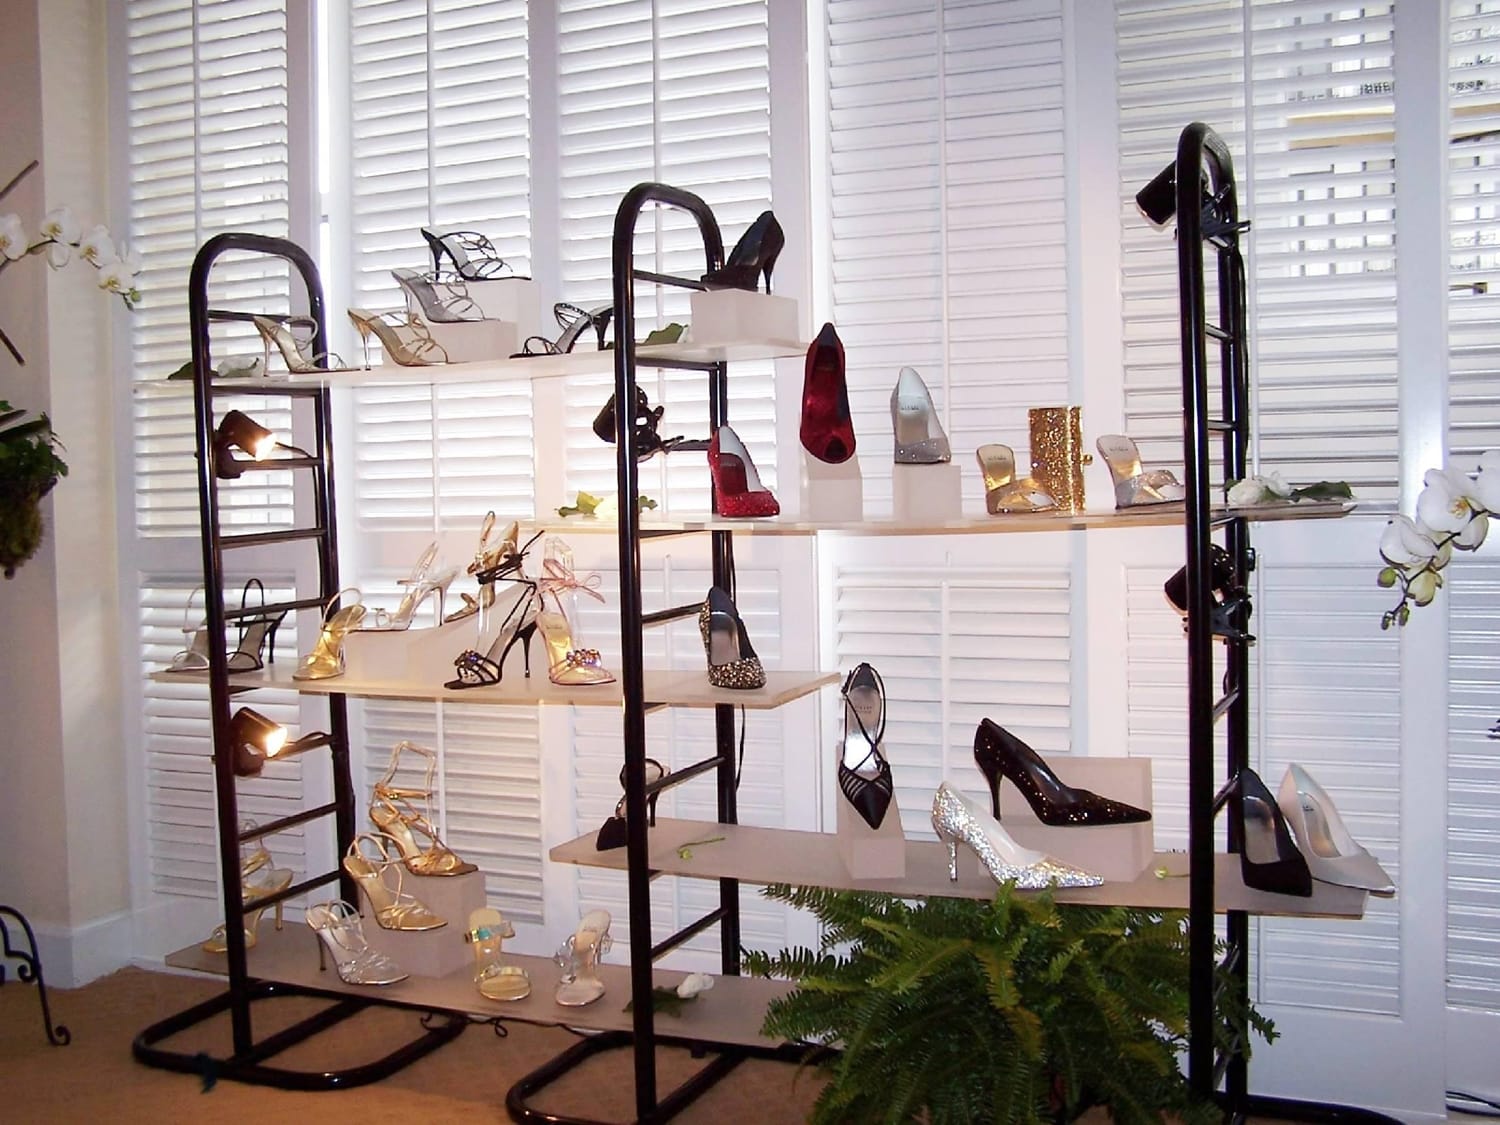 Preview of the Stuart Weitzman Collection for the 2005 Oscars